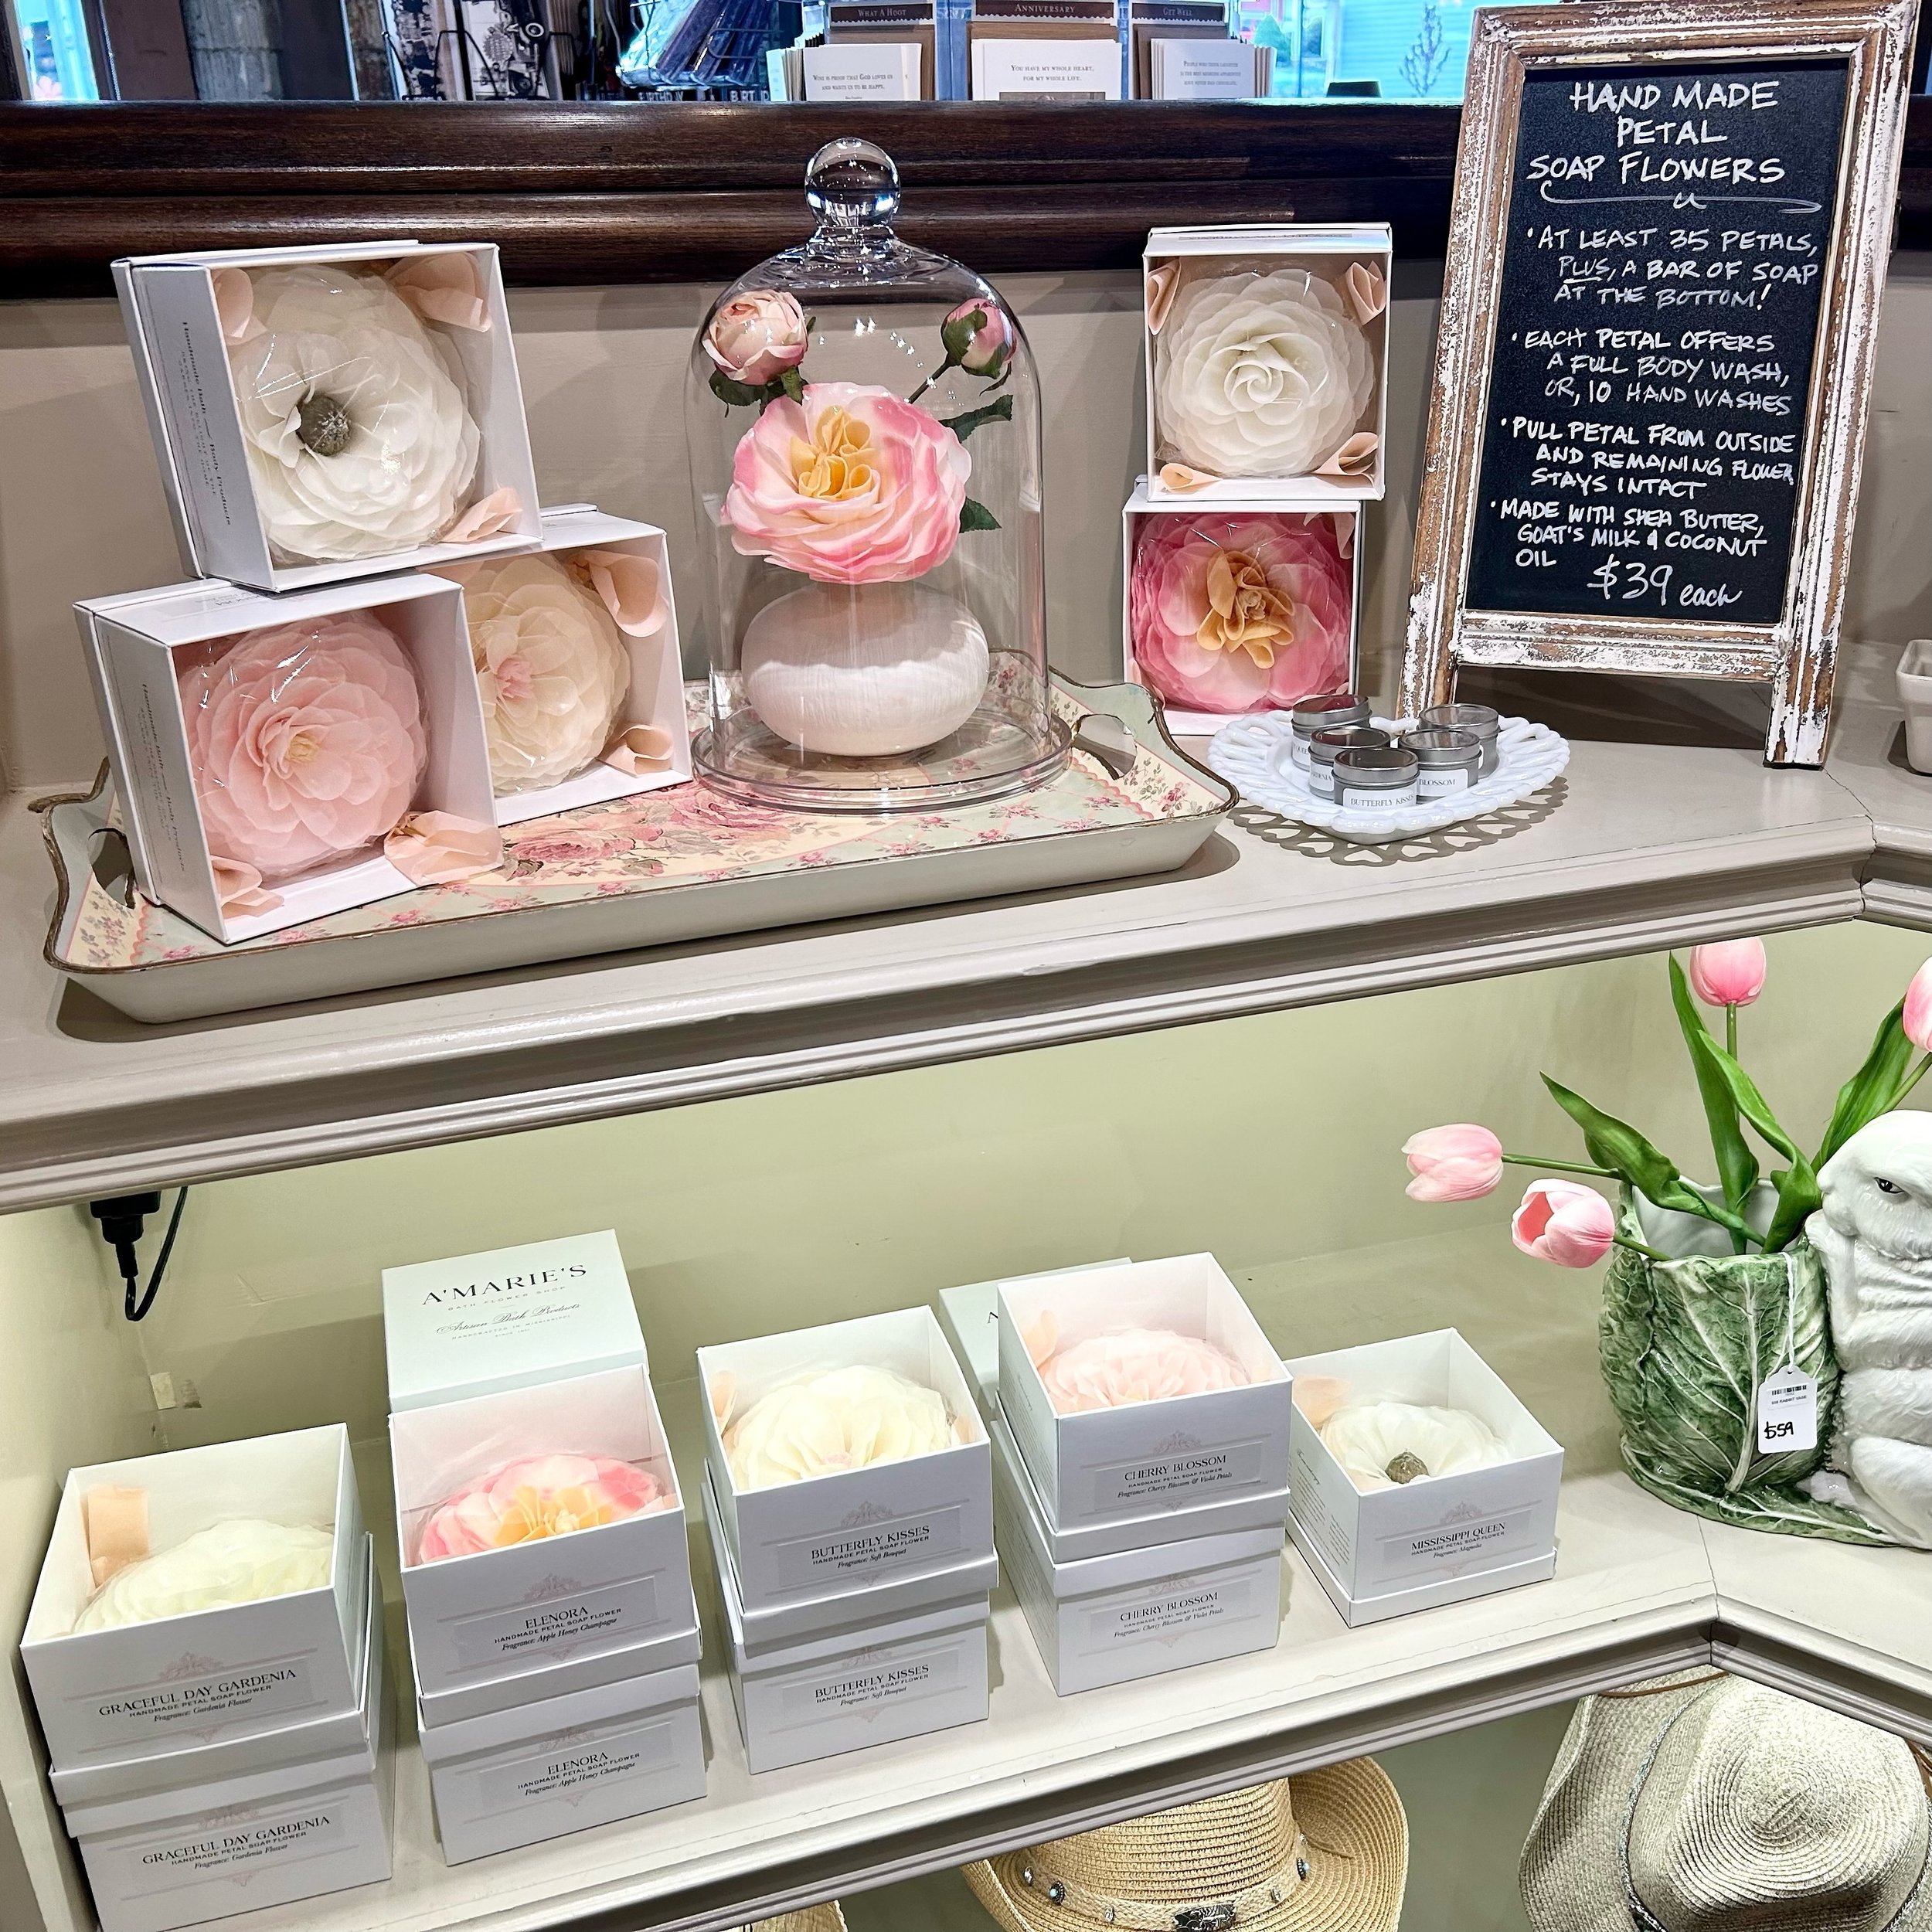 Looking for the perfect Mother&rsquo;s Day gift? 🌸 Treat her to these gorgeous hand-made petal soap flowers from Metamora General! Each flower comes with at least 35 petals plus a whole bar of soap at the bottom! Each petal provides a full body or 1